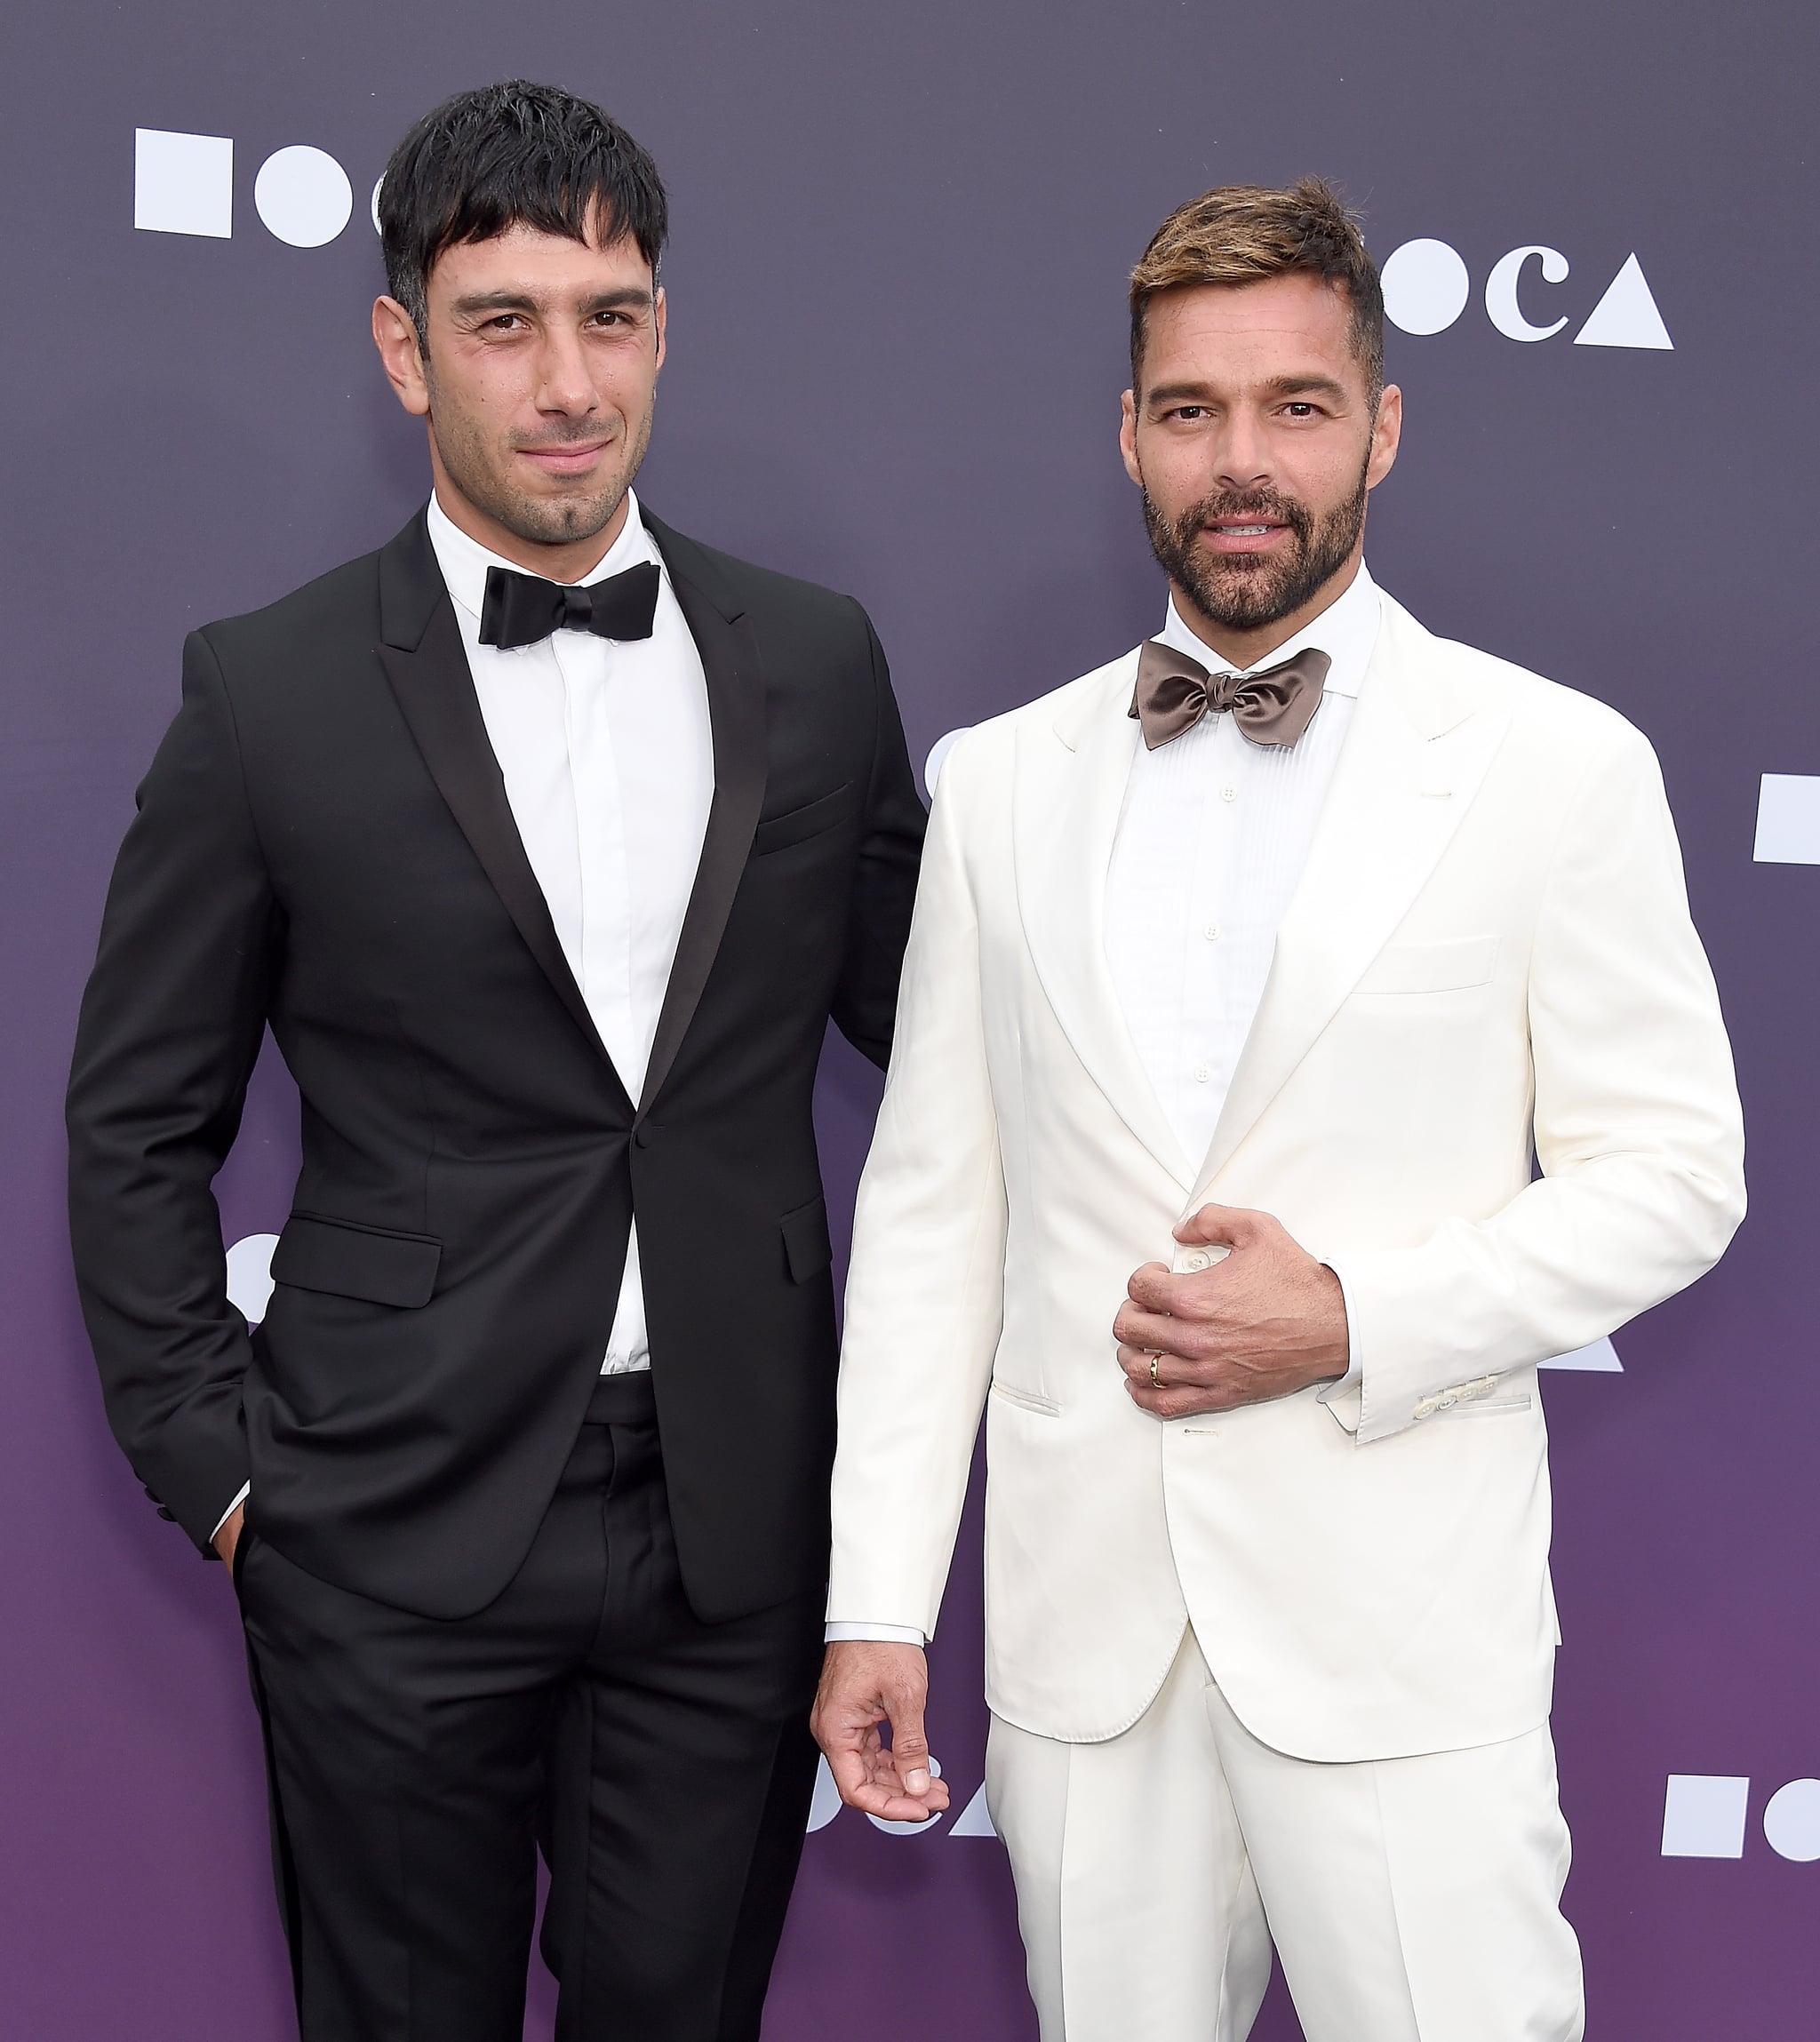 LOS ANGELES, CA - MAY 18:  Ricky Martin and Jwan Yosef attend the MOCA Benefit 2019 at The Geffen Contemporary at MOCA on May 18, 2019 in Los Angeles, California.  (Photo by Gregg DeGuire/FilmMagic)